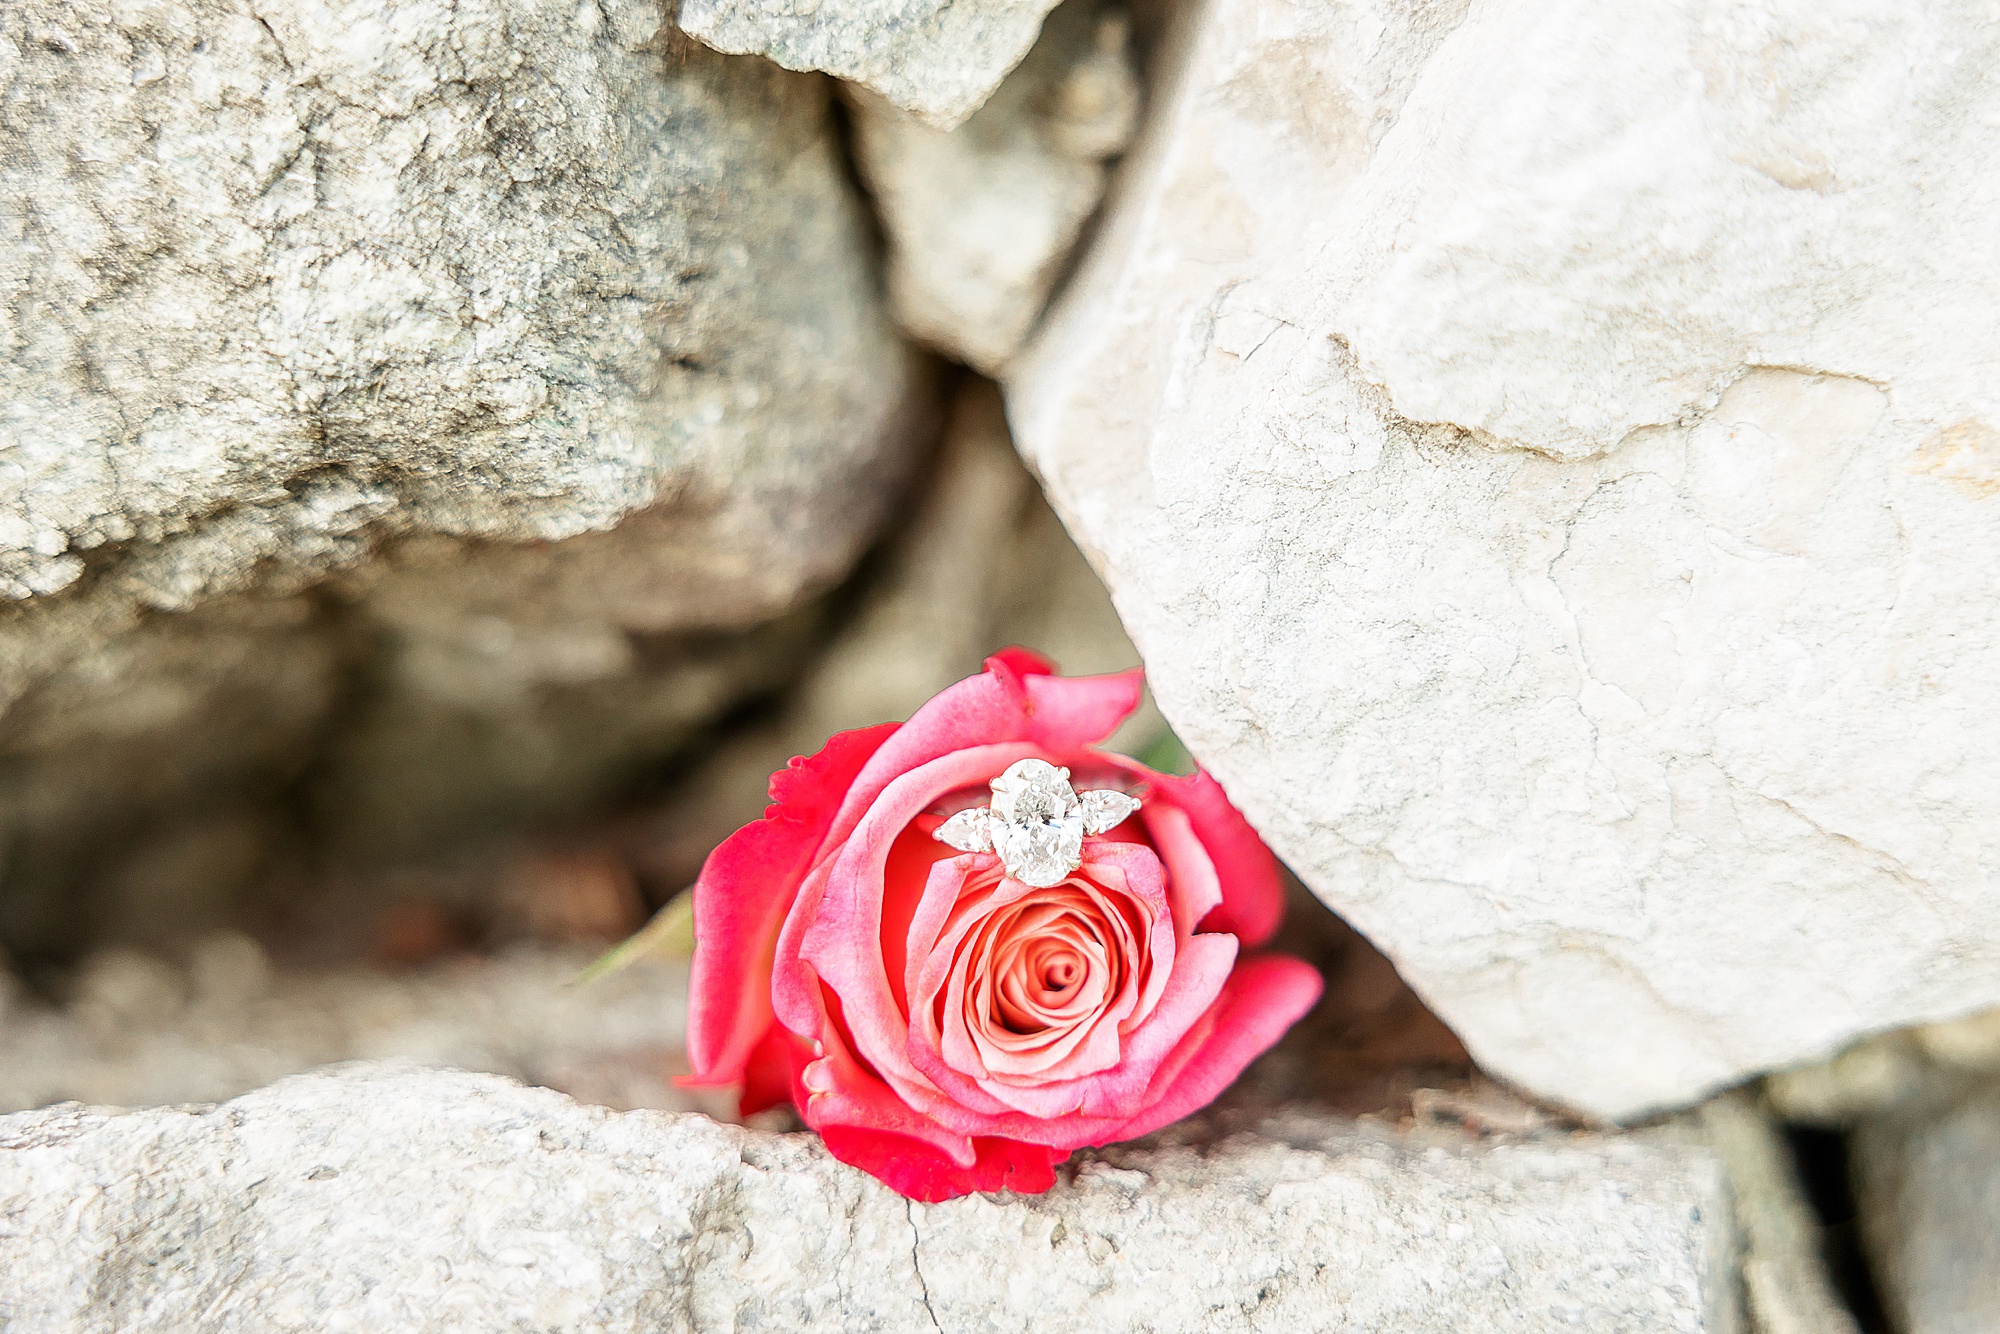 engagement ring rests in pink rose